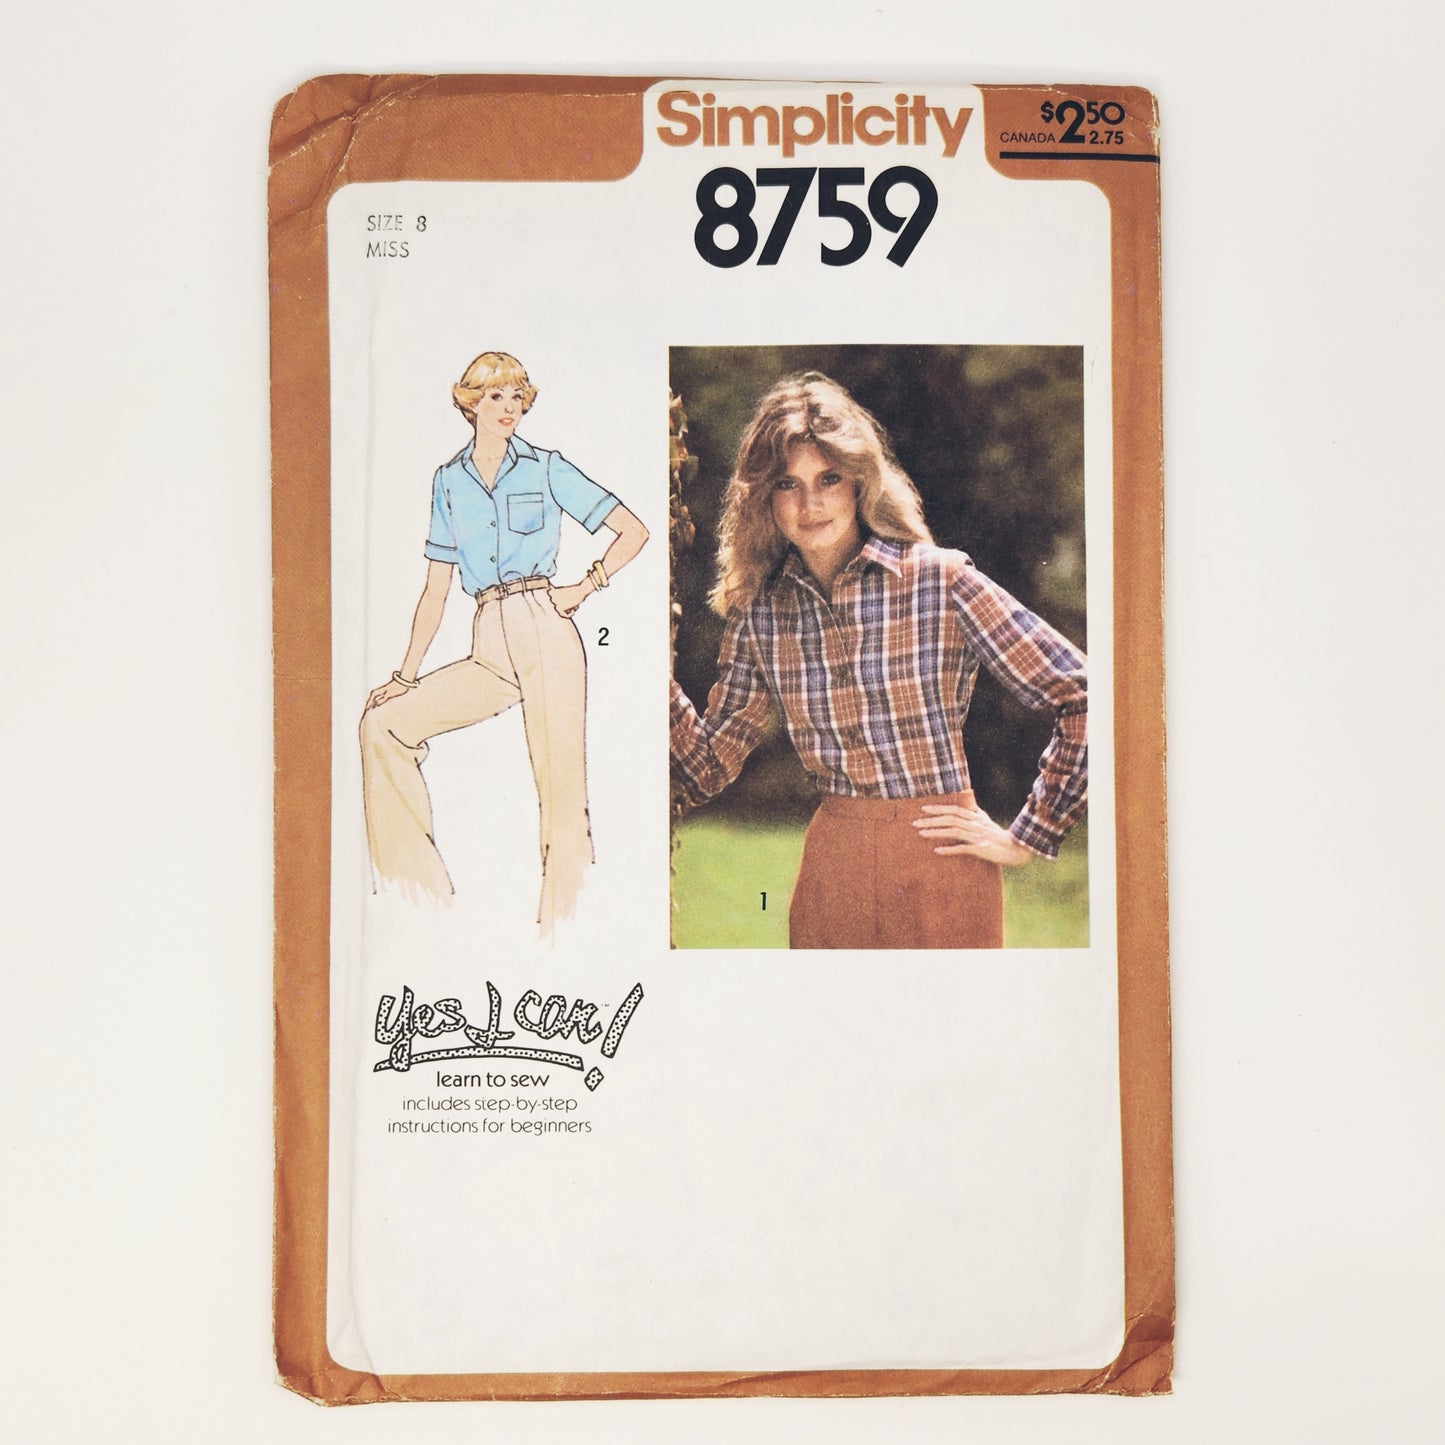 1978 Simplicity 8759 Sewing Pattern Misses Shirt Size 8